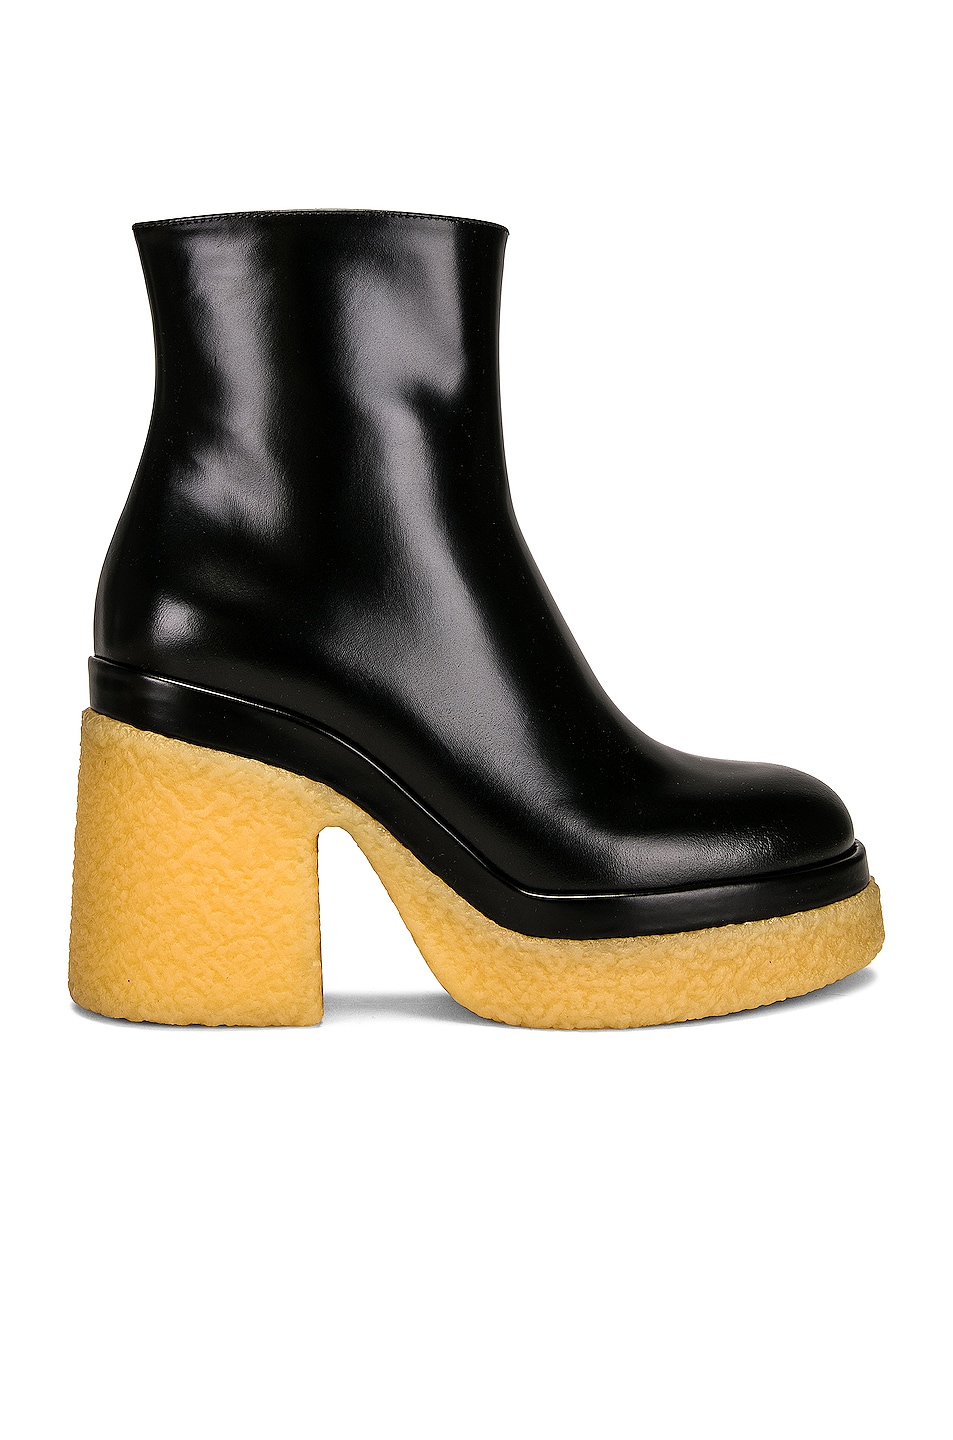 Image 1 of Chloe Chloé Kurtys Ankle Boots in Black